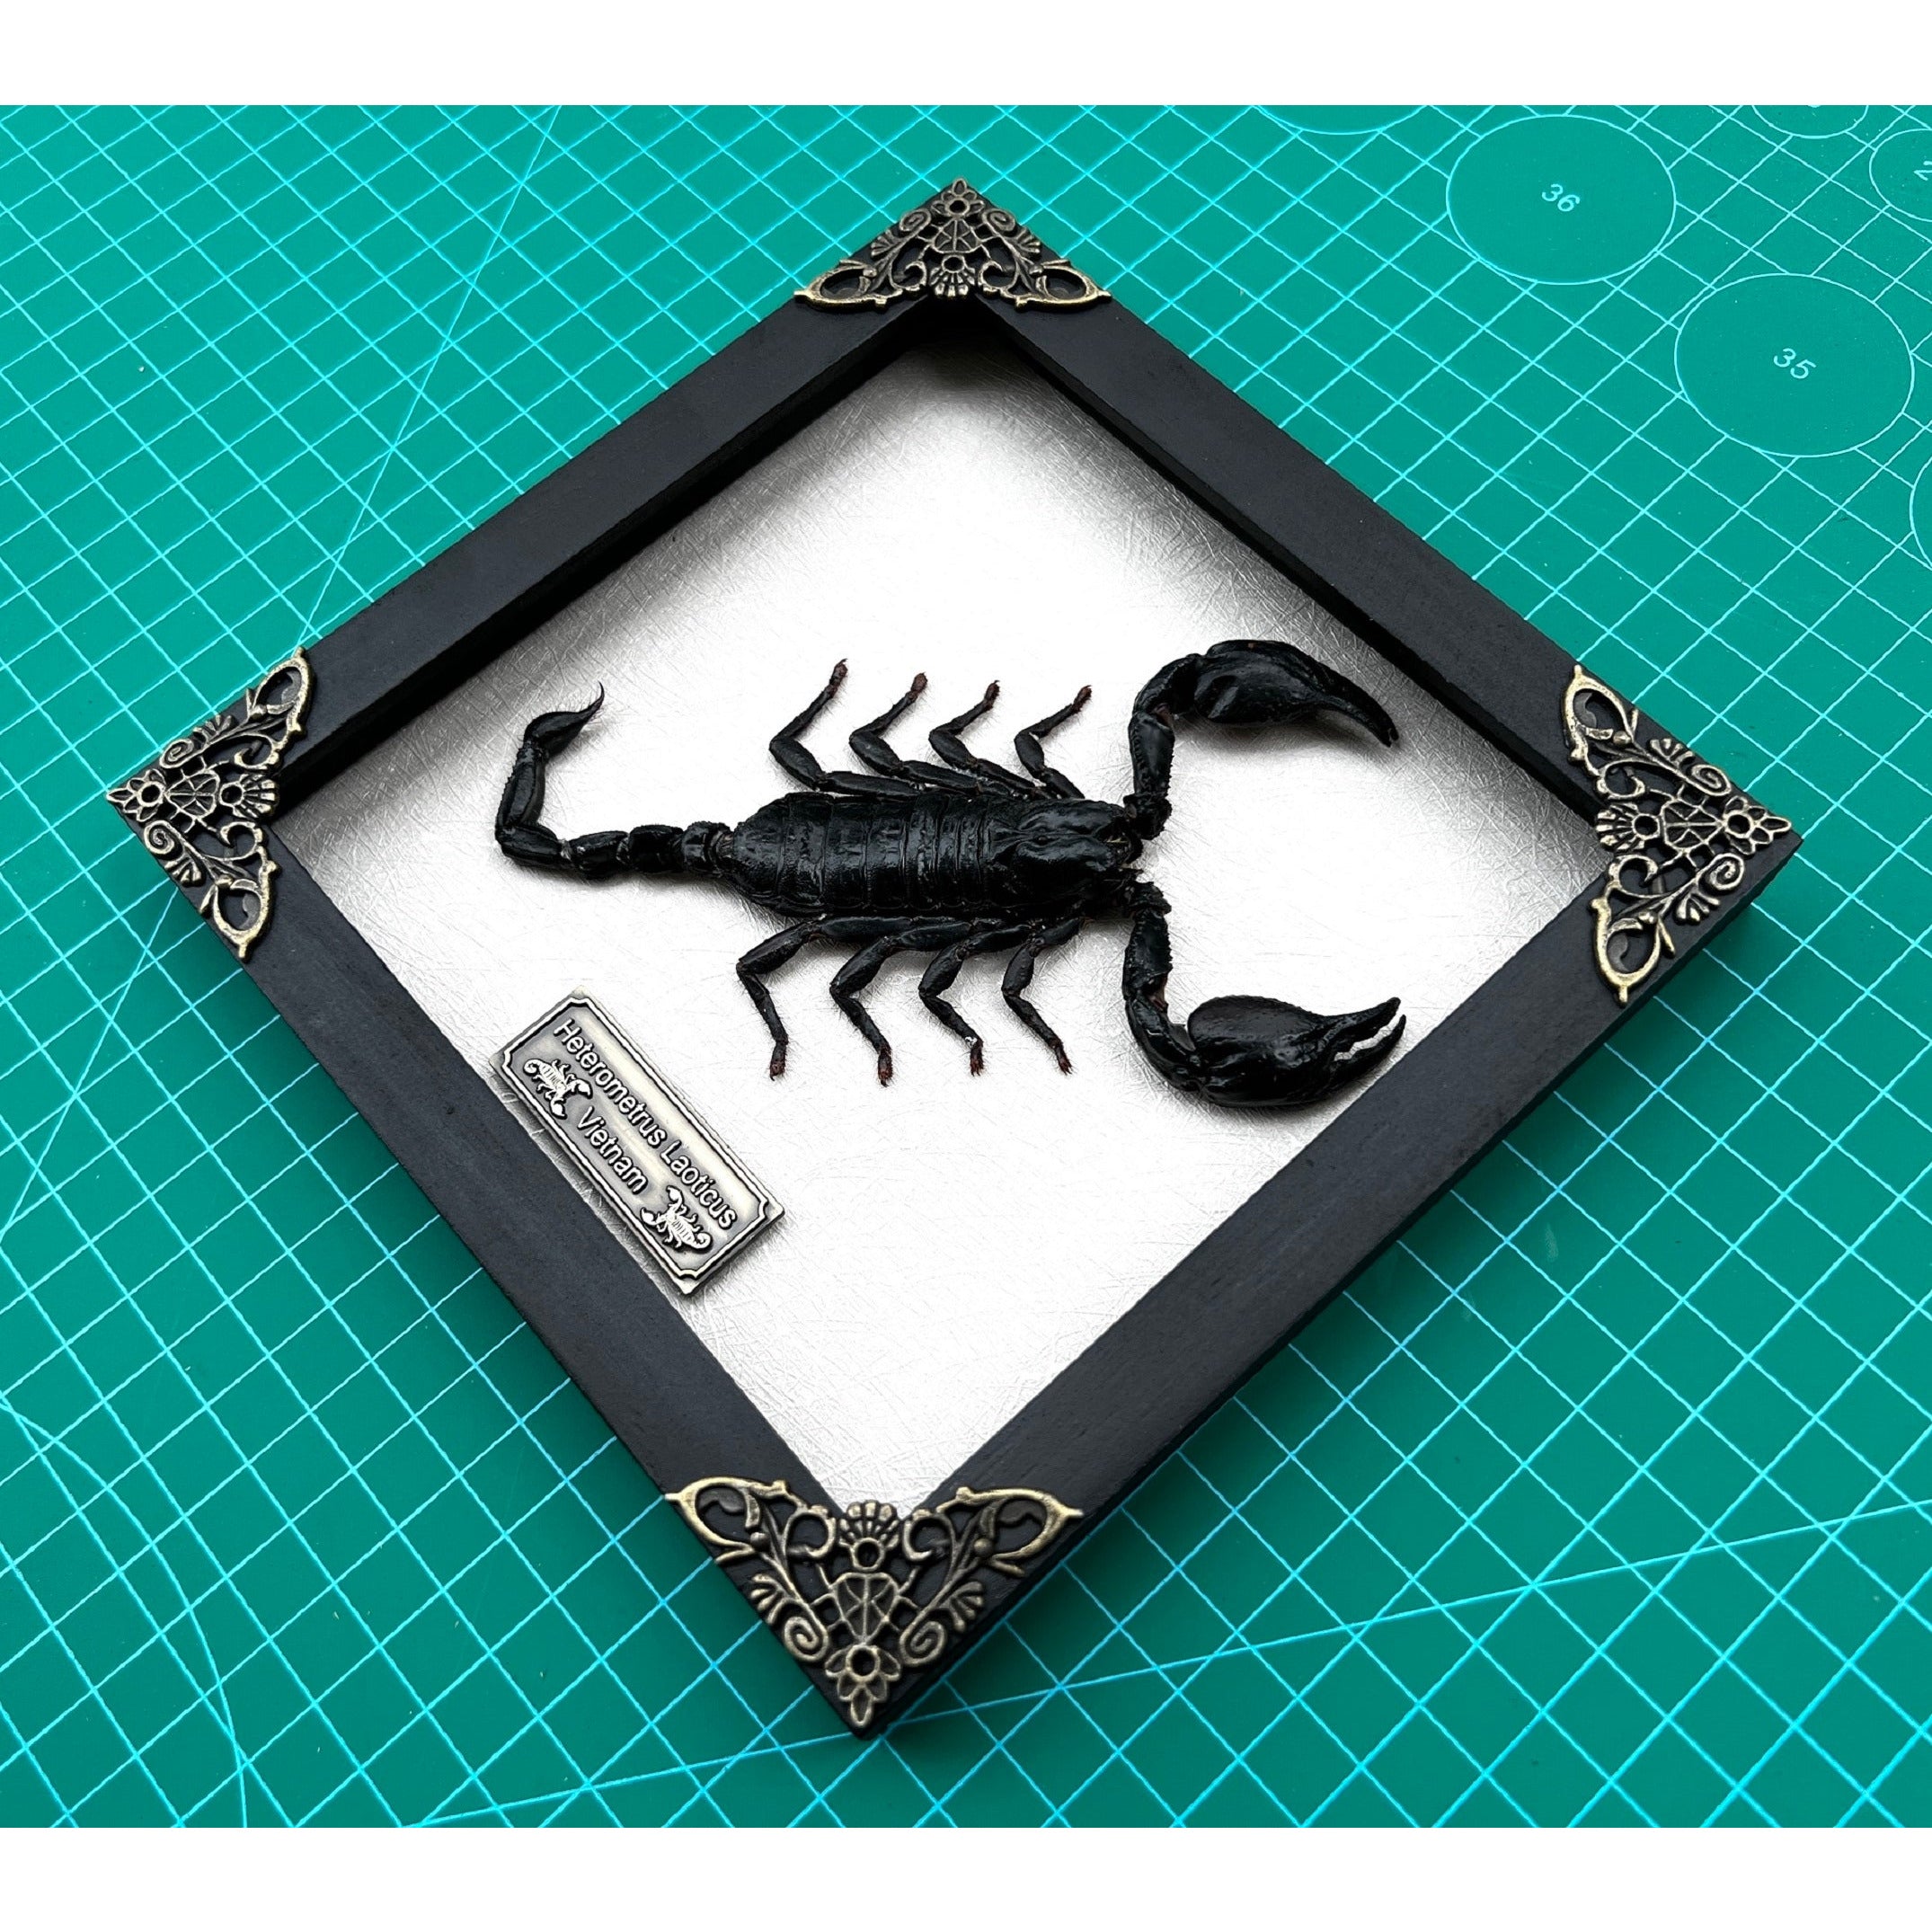 Real Framed Scorpion Shadow Box Dried Insect Taxidermy Bug Oddities Specimen Display Tabletop Wall Art Home Decor Living Hanging Gallery K16-51-TR - Vinacreations